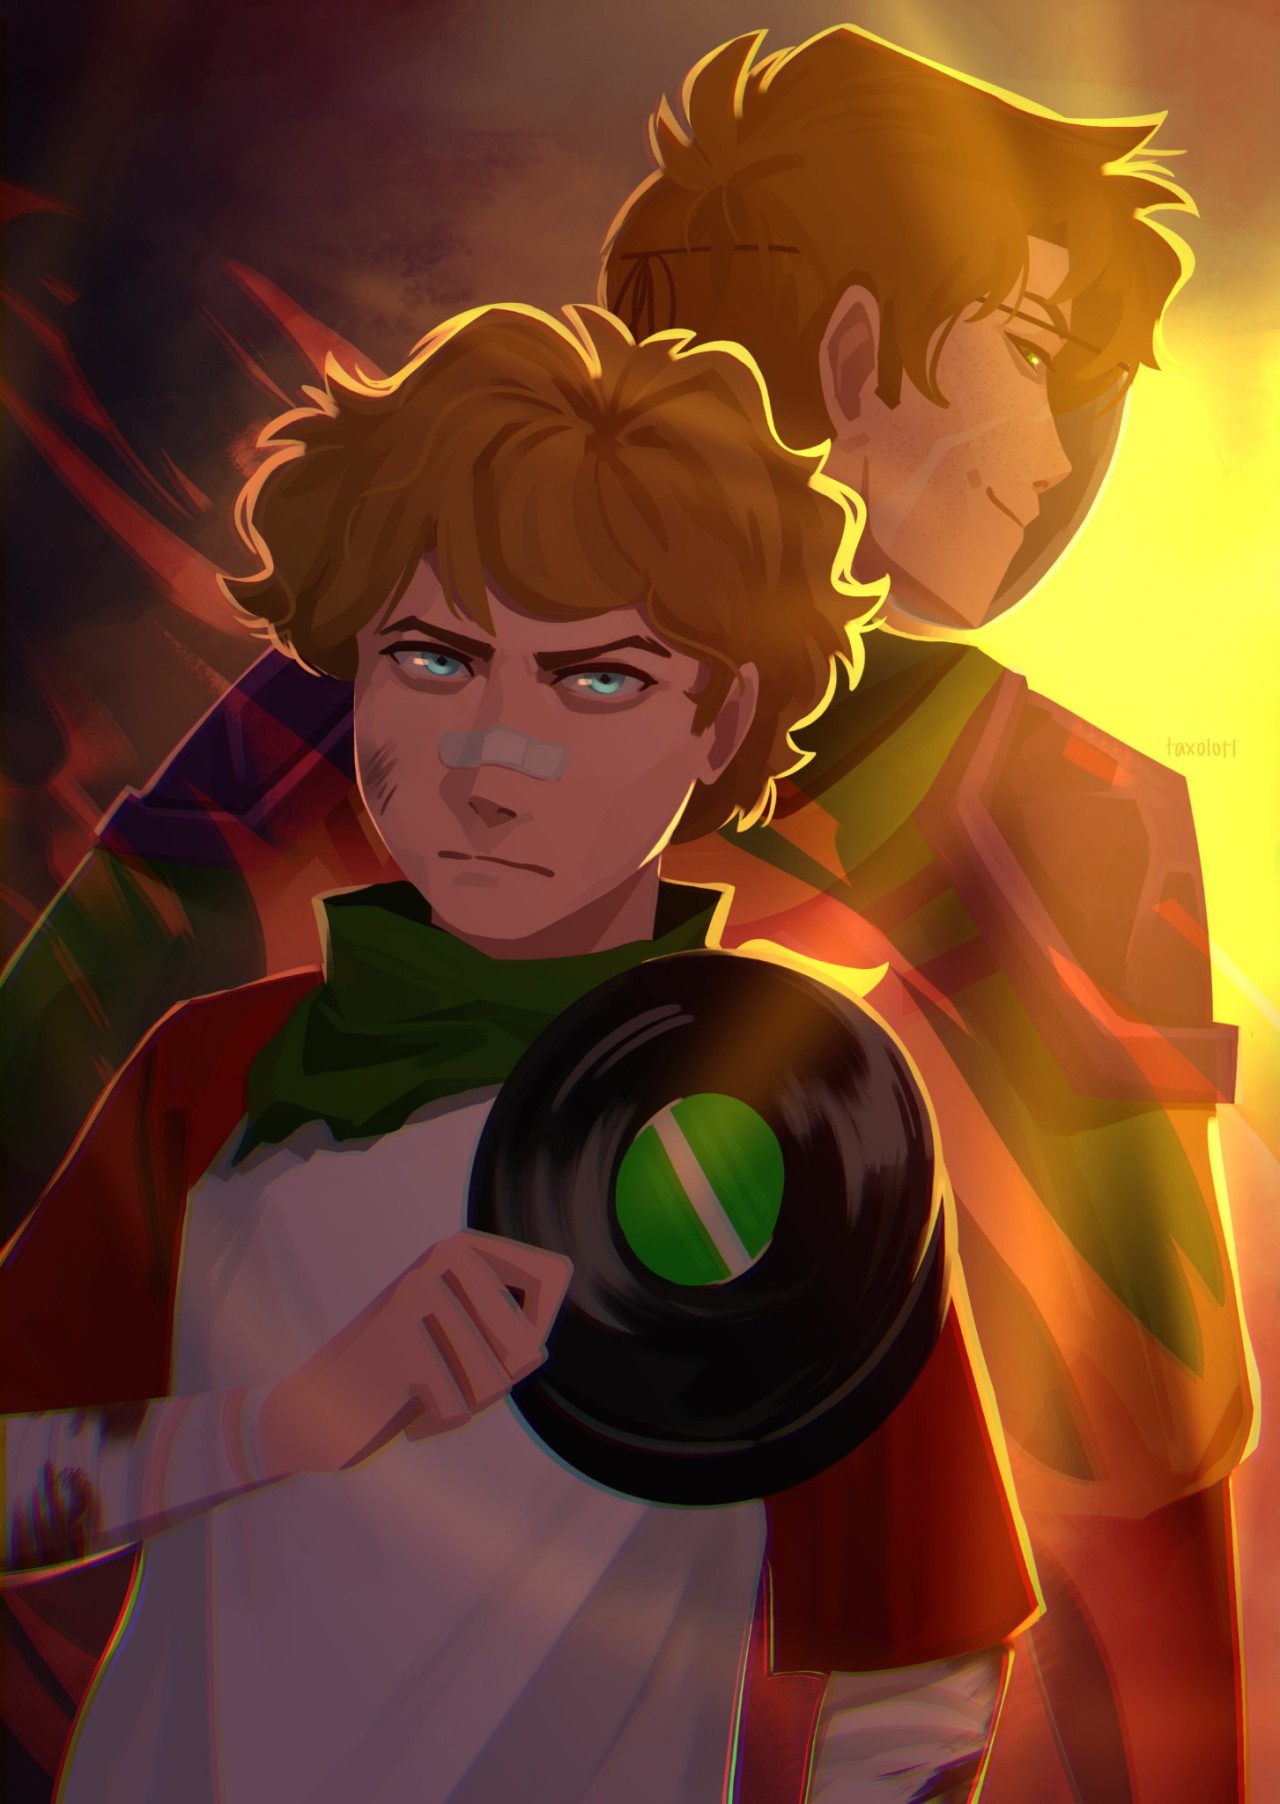 This is a drawing of Tommy and Dream from the waist up. Tommy is looking determinedly at the camera, dirty and scuffed with a bandaid across his nose. He holds his two music discs across his chest. Dream stands back-to-back with him in full netherite armor, looking over his shoulder and down at Tommy, smiling smugly. The audience can see his face, but the other half of his face, the side away from the camera, wears his white mask. There is a big lense flare over Dream's shoulder, obscuring some of the details. The rest of the background is dark and smoky or dusty.